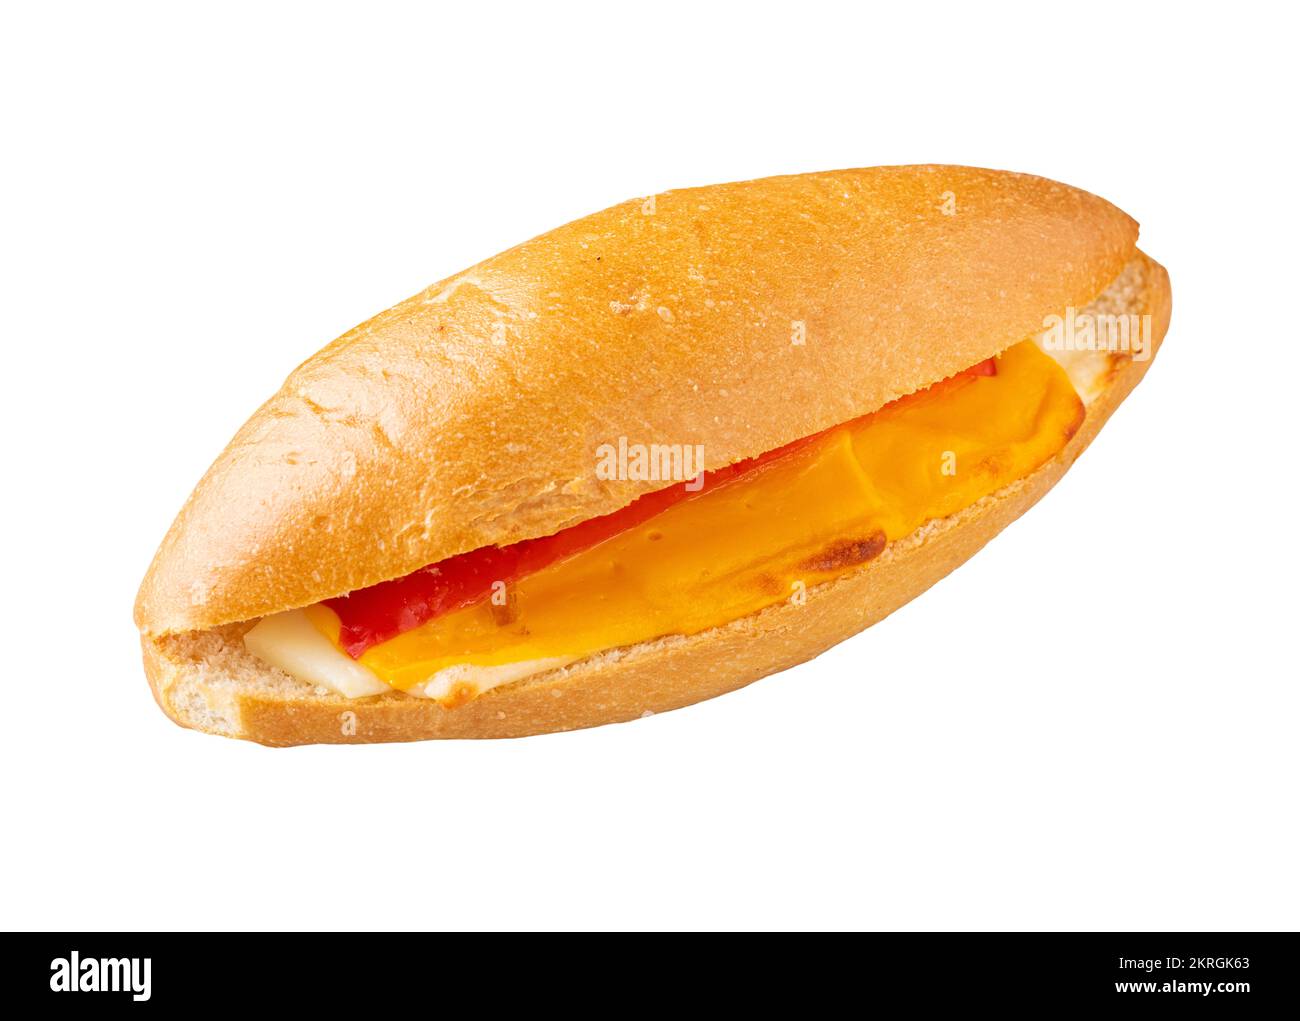 Cheese tomato cucumber sandwich Cut Out Stock Images & Pictures - Alamy